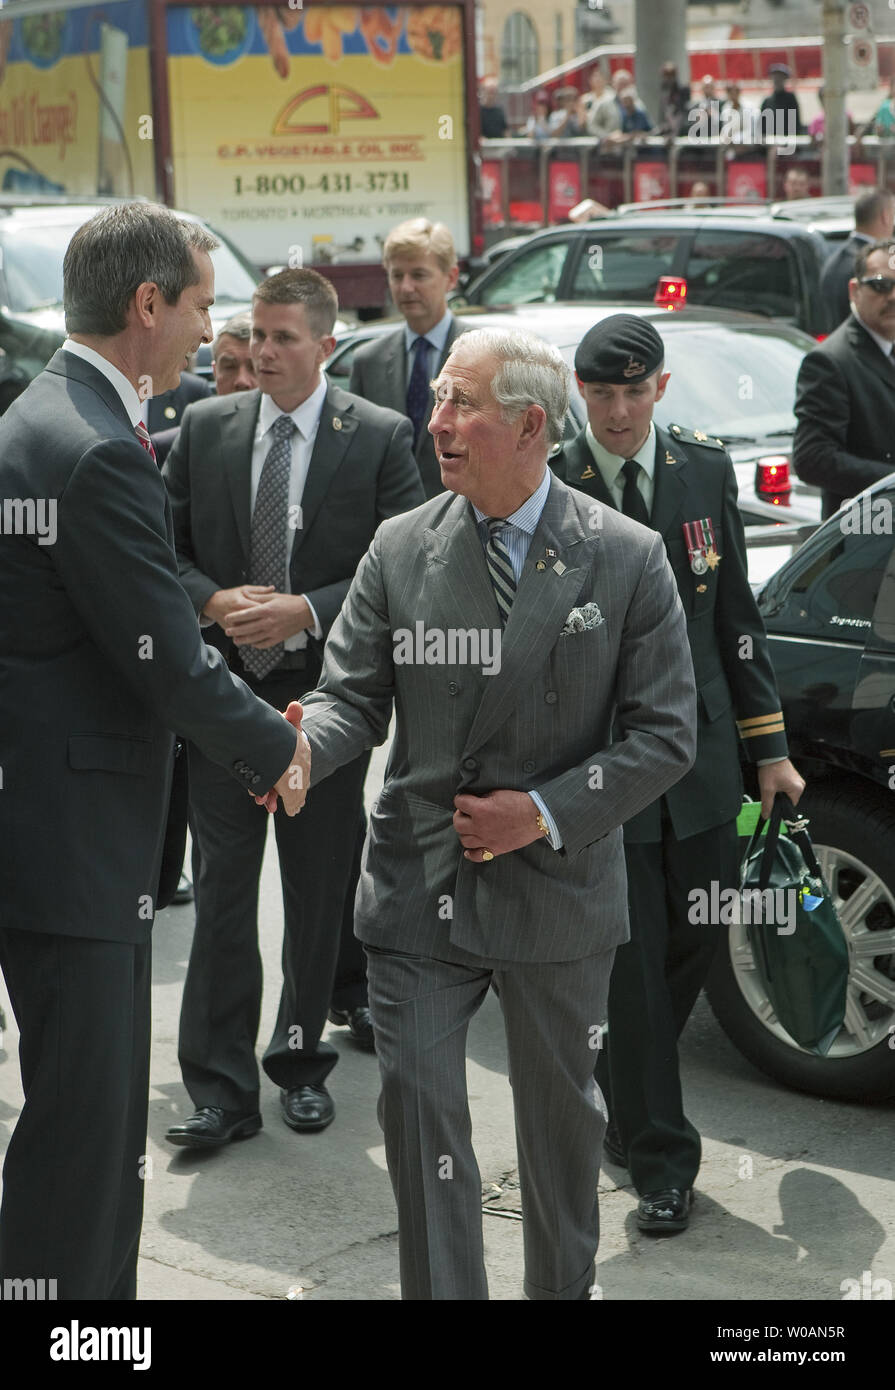 Prince Charles is welcomed by Ontario Premier Dalton McGuinty as he arrives at the Digital Media Zone at Ryerson University in Toronto, Ontario on May 22, 2012 during the second leg of the 2012 Royal Tour to Canada part of Queen Elizabeth's Diamond Jubilee celebrations.     UPI Photo /Heinz Ruckemann Stock Photo